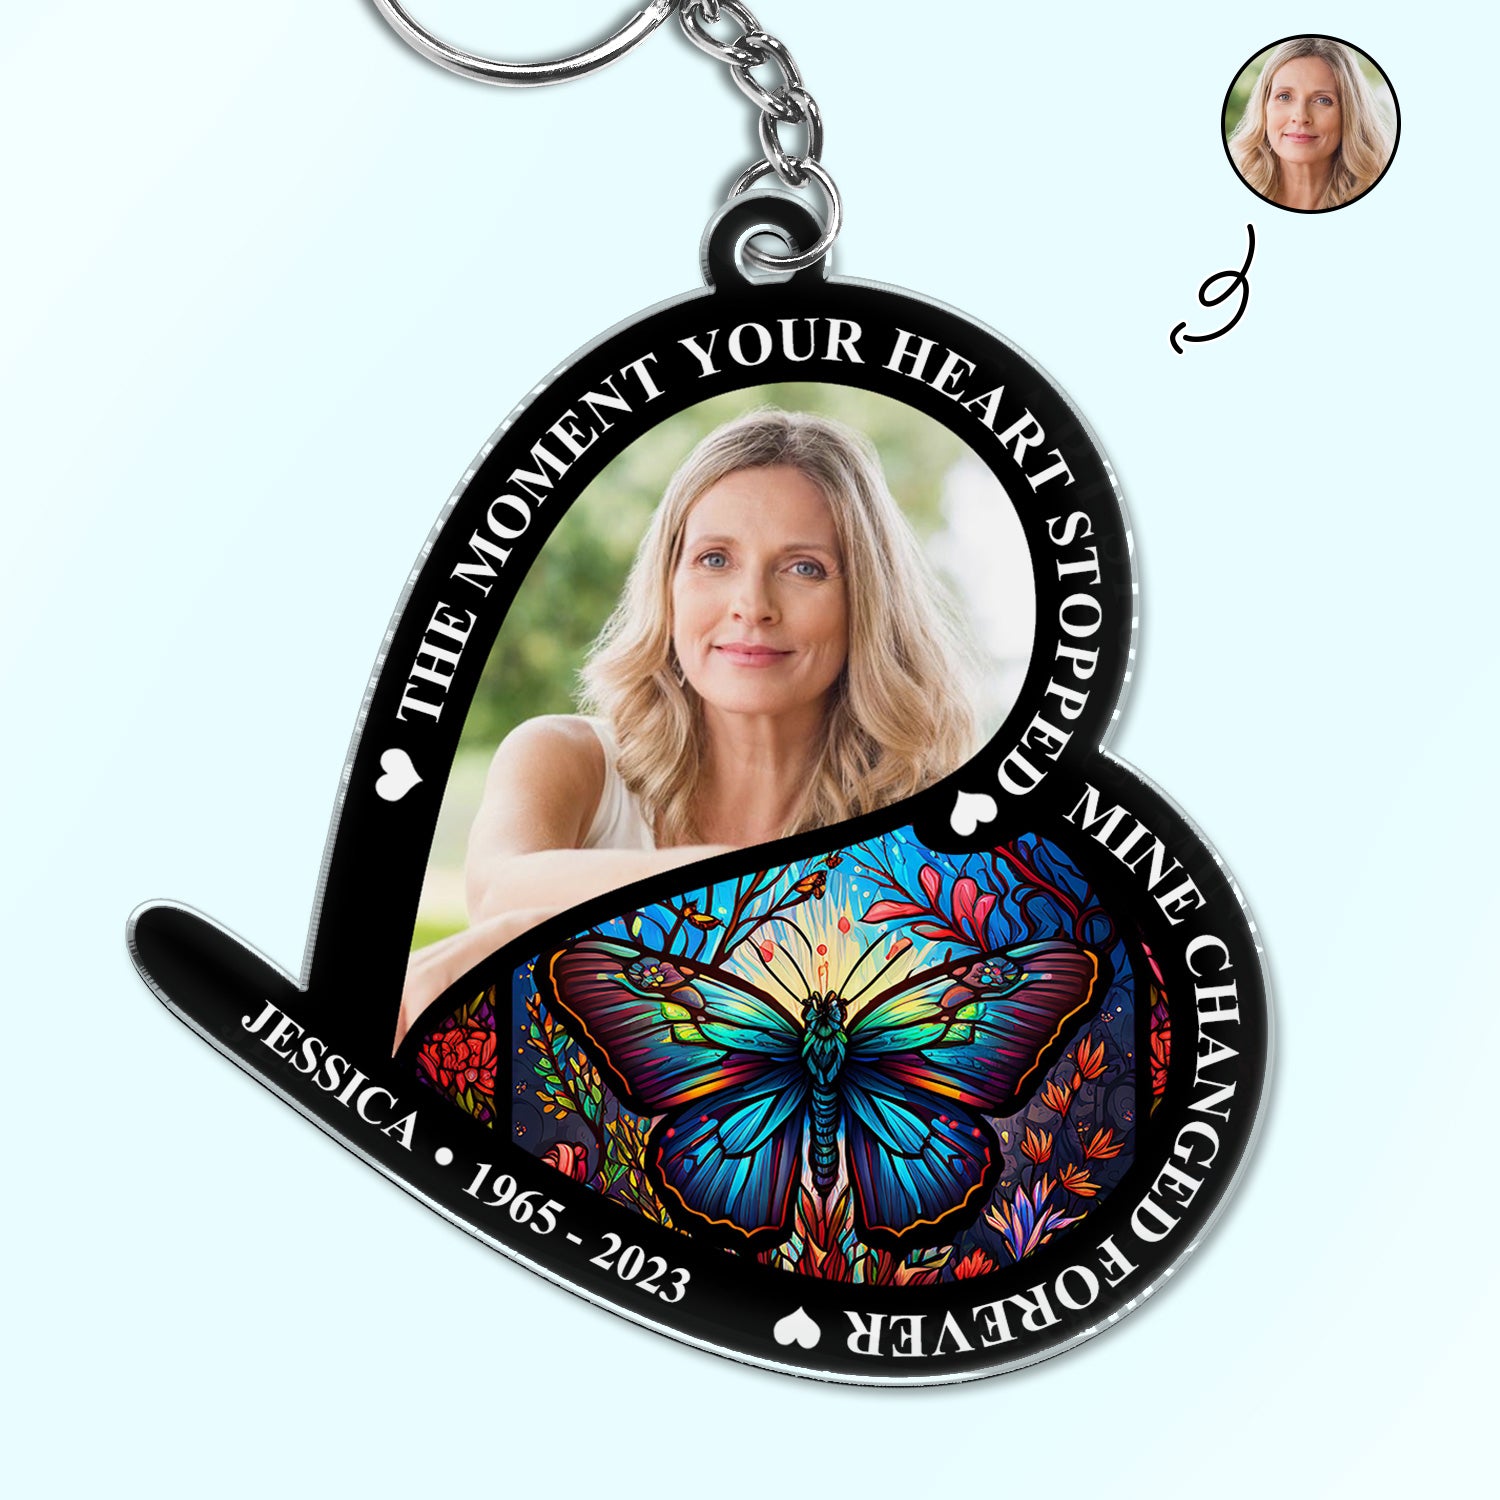 Custom Photo The Moment Your Heart Stopped - Memorial Gift For Family - Personalized Acrylic Keychain